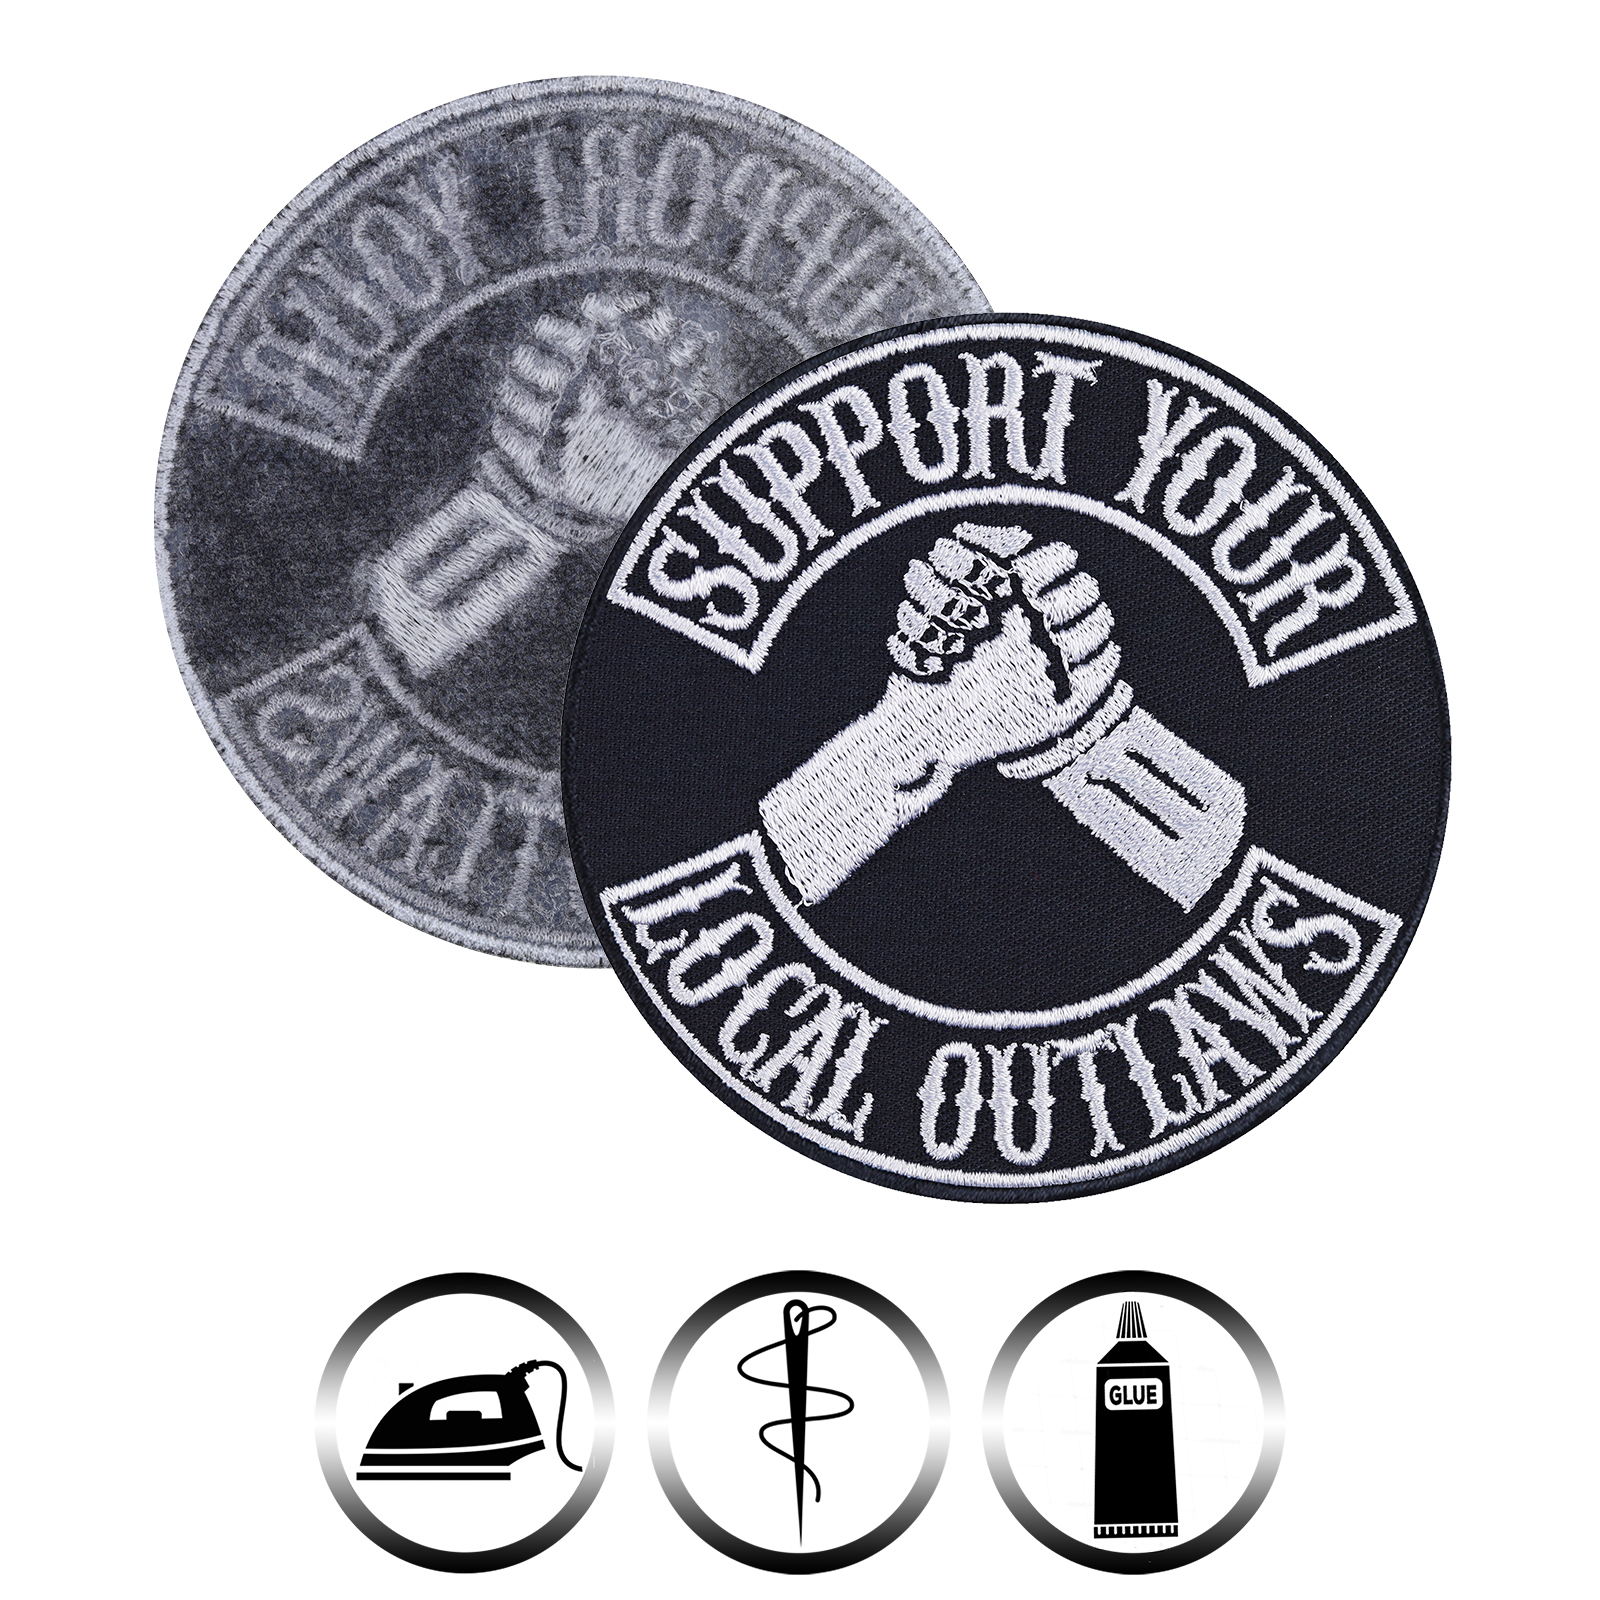 Support your local outlaws - Patch